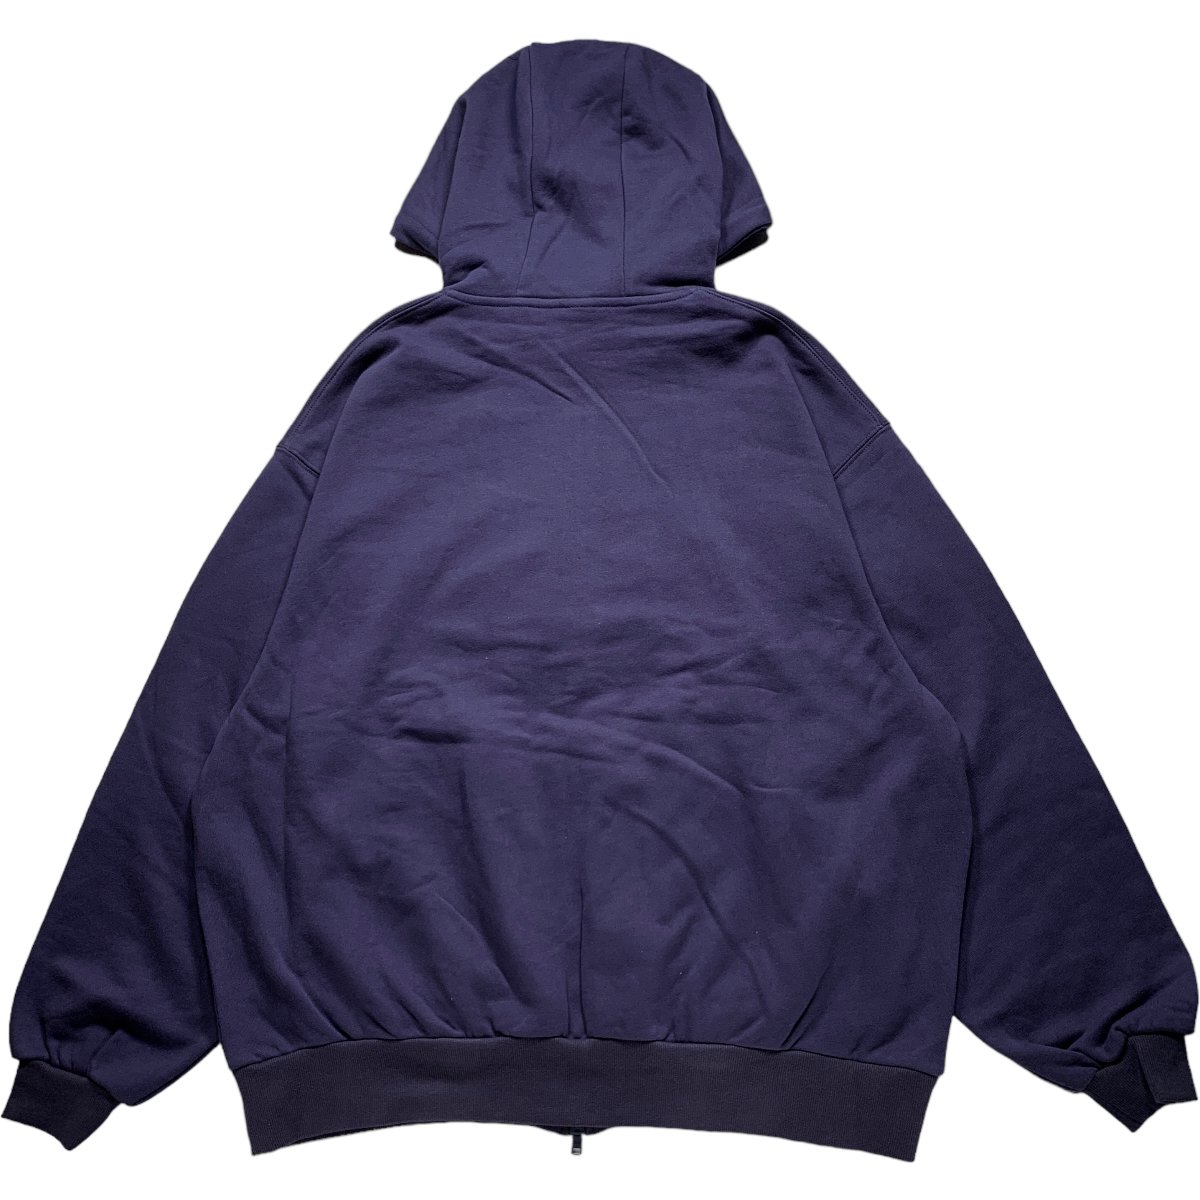 TIGHTBOOTH《タイトブース》PYRAMID ZIP HOODIE(FW23-SW02) | 公式通販 